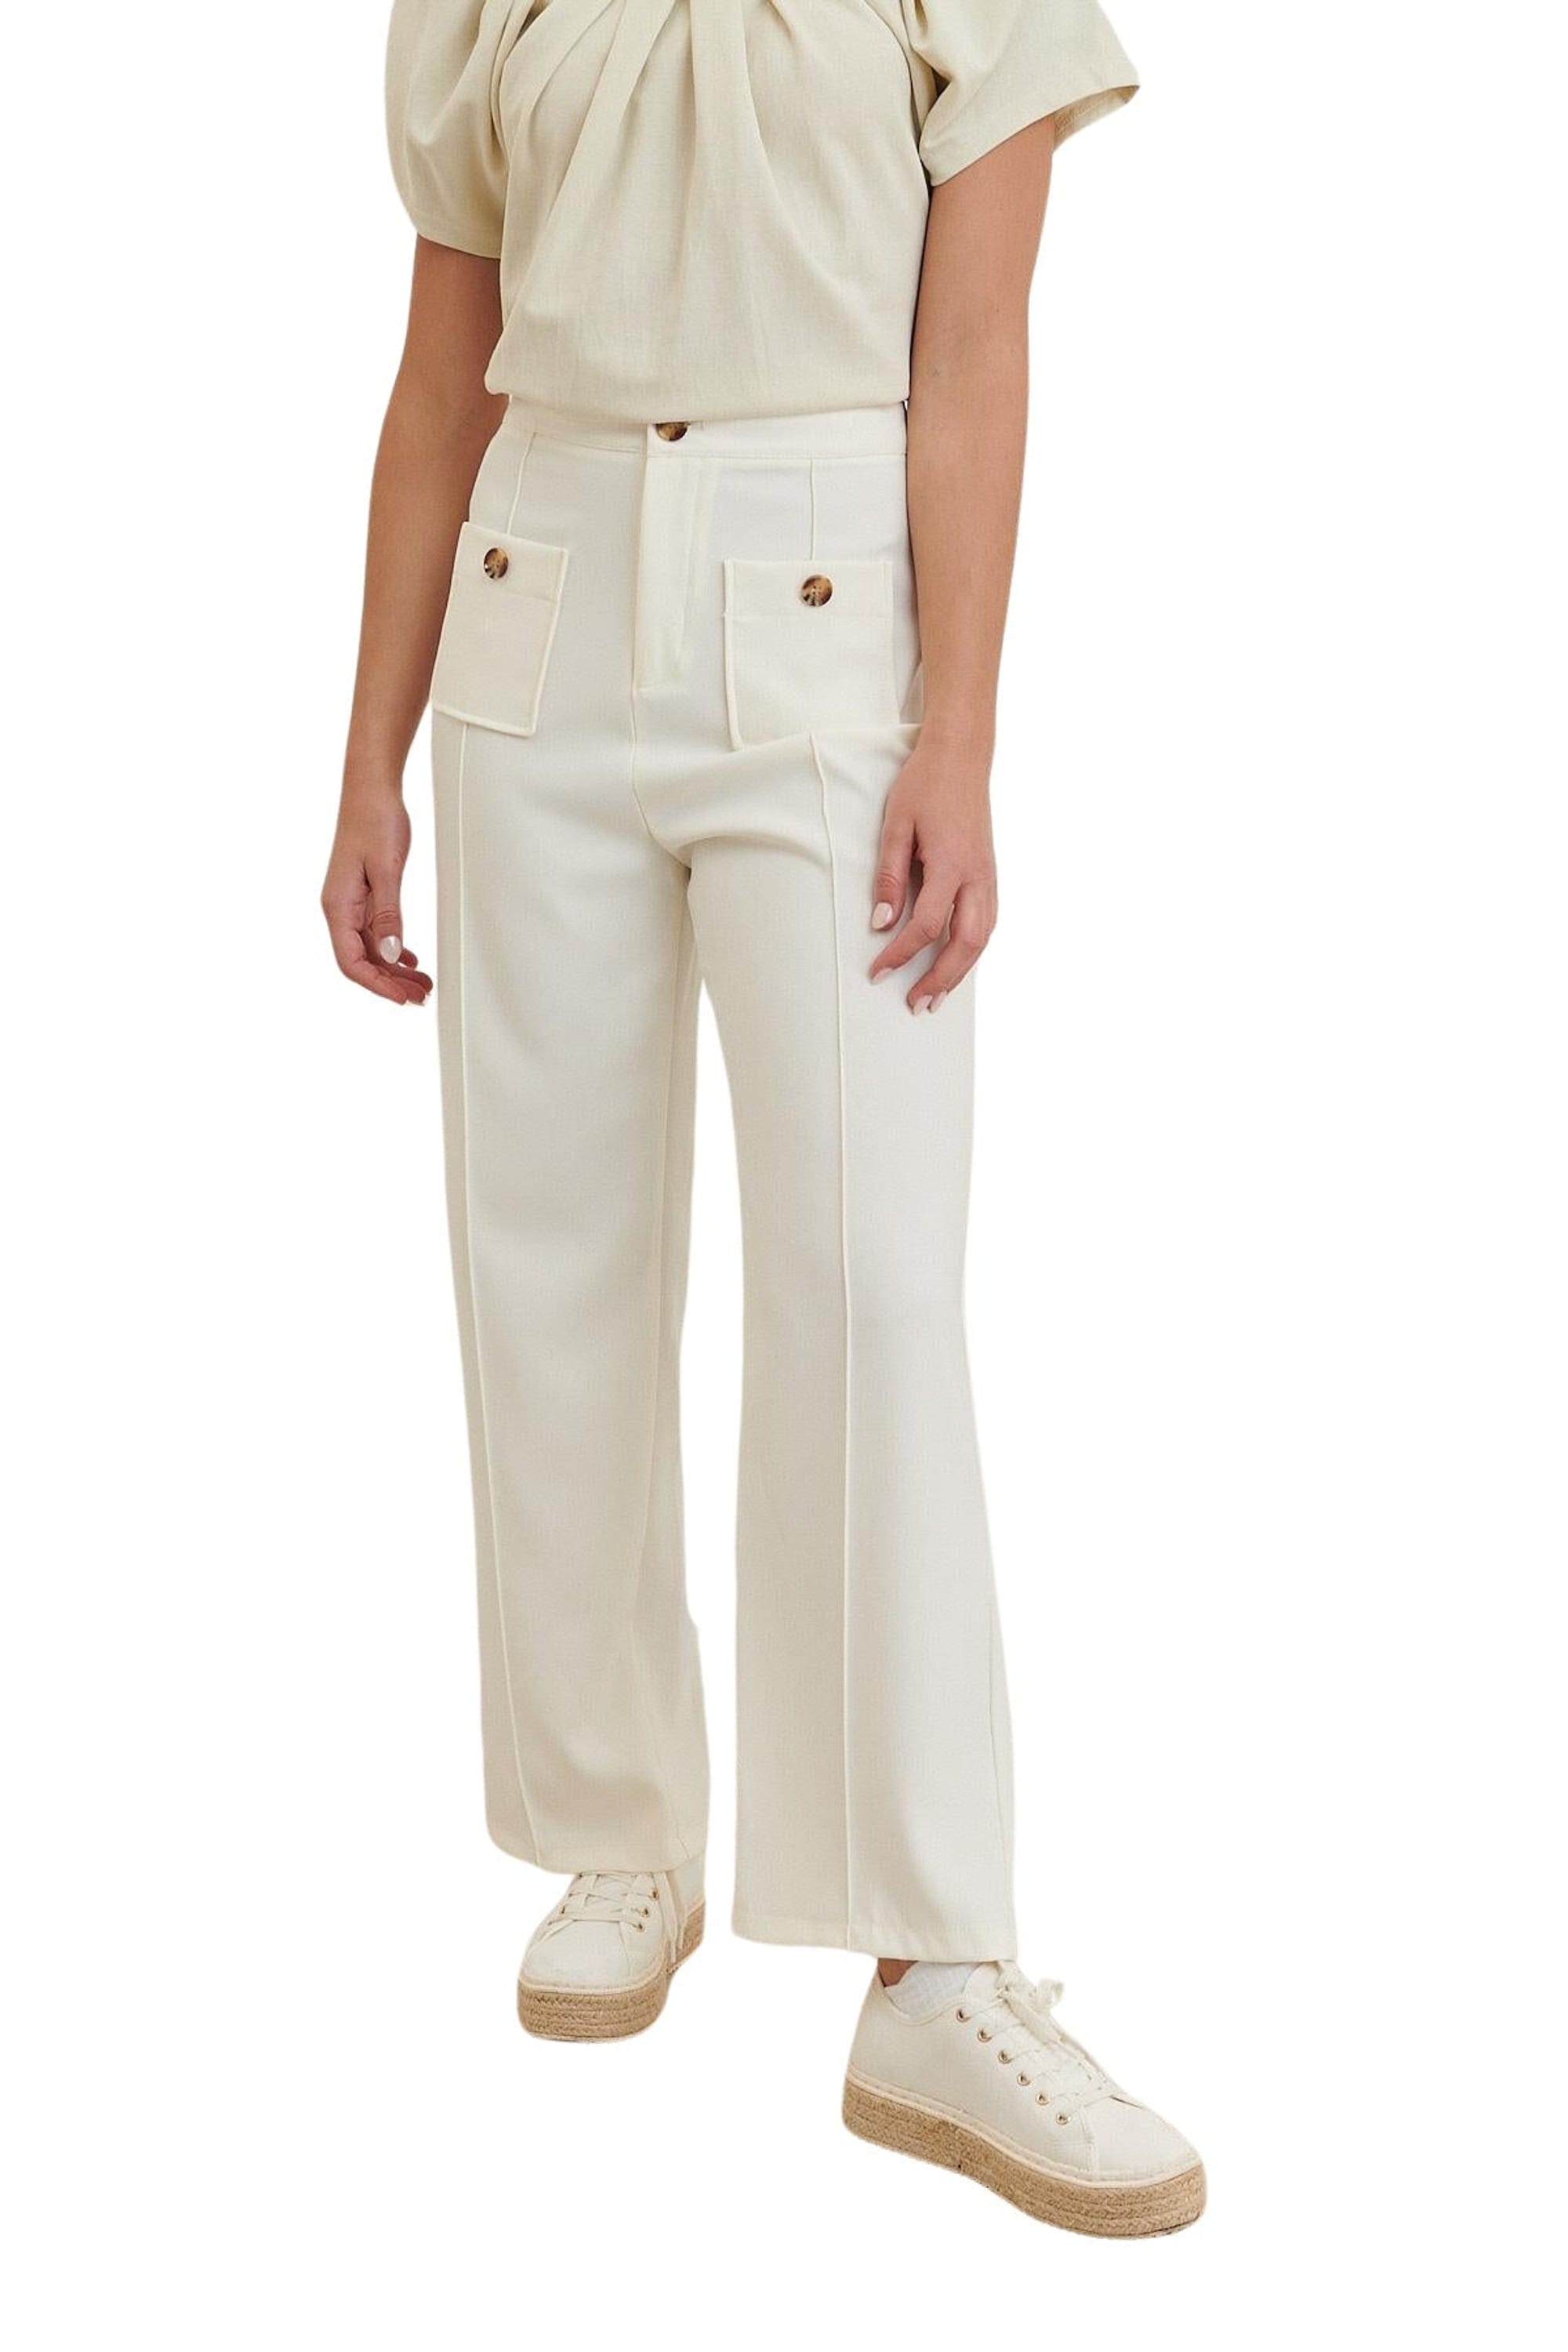 Clever Alice French Trousers - clever alice